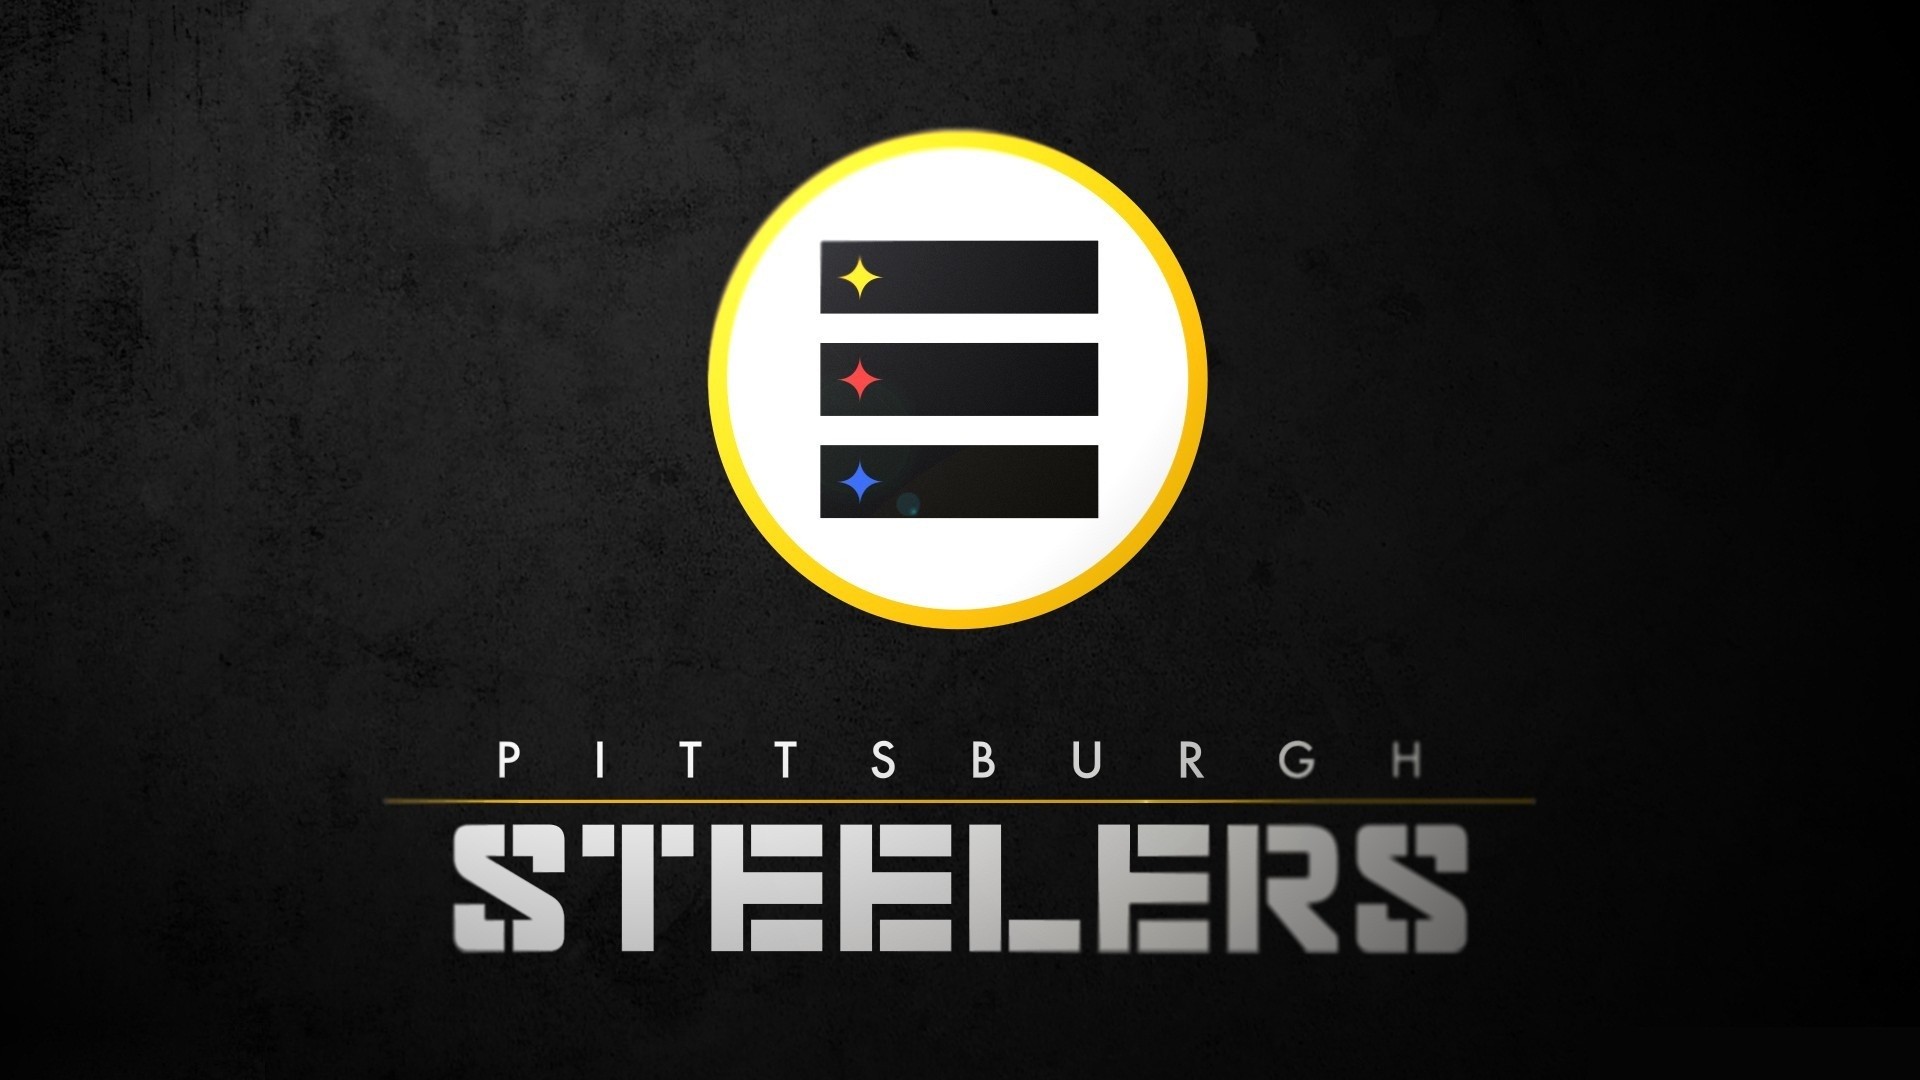 1920x1080 Pittsburgh Steelers For PC Wallpaper with resolution x pixel. You can make  this wallpaper for